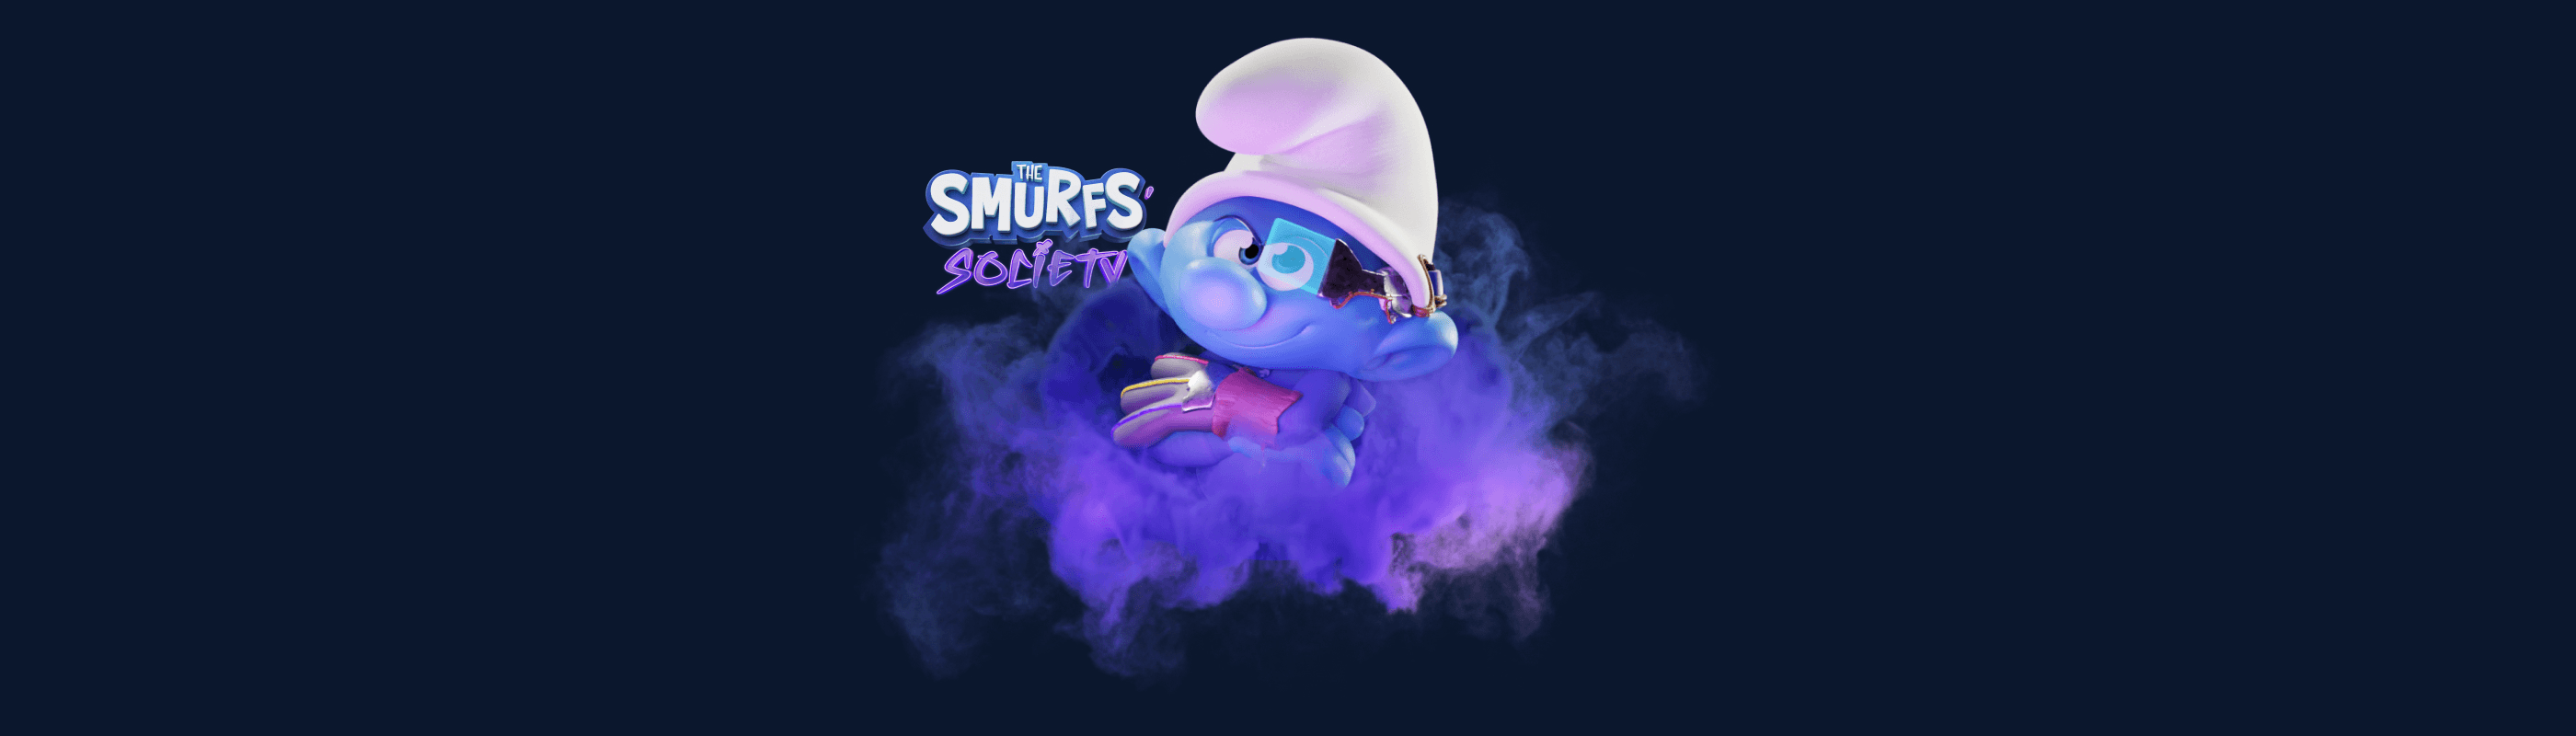 The Smurfs’ Society | Statuettes